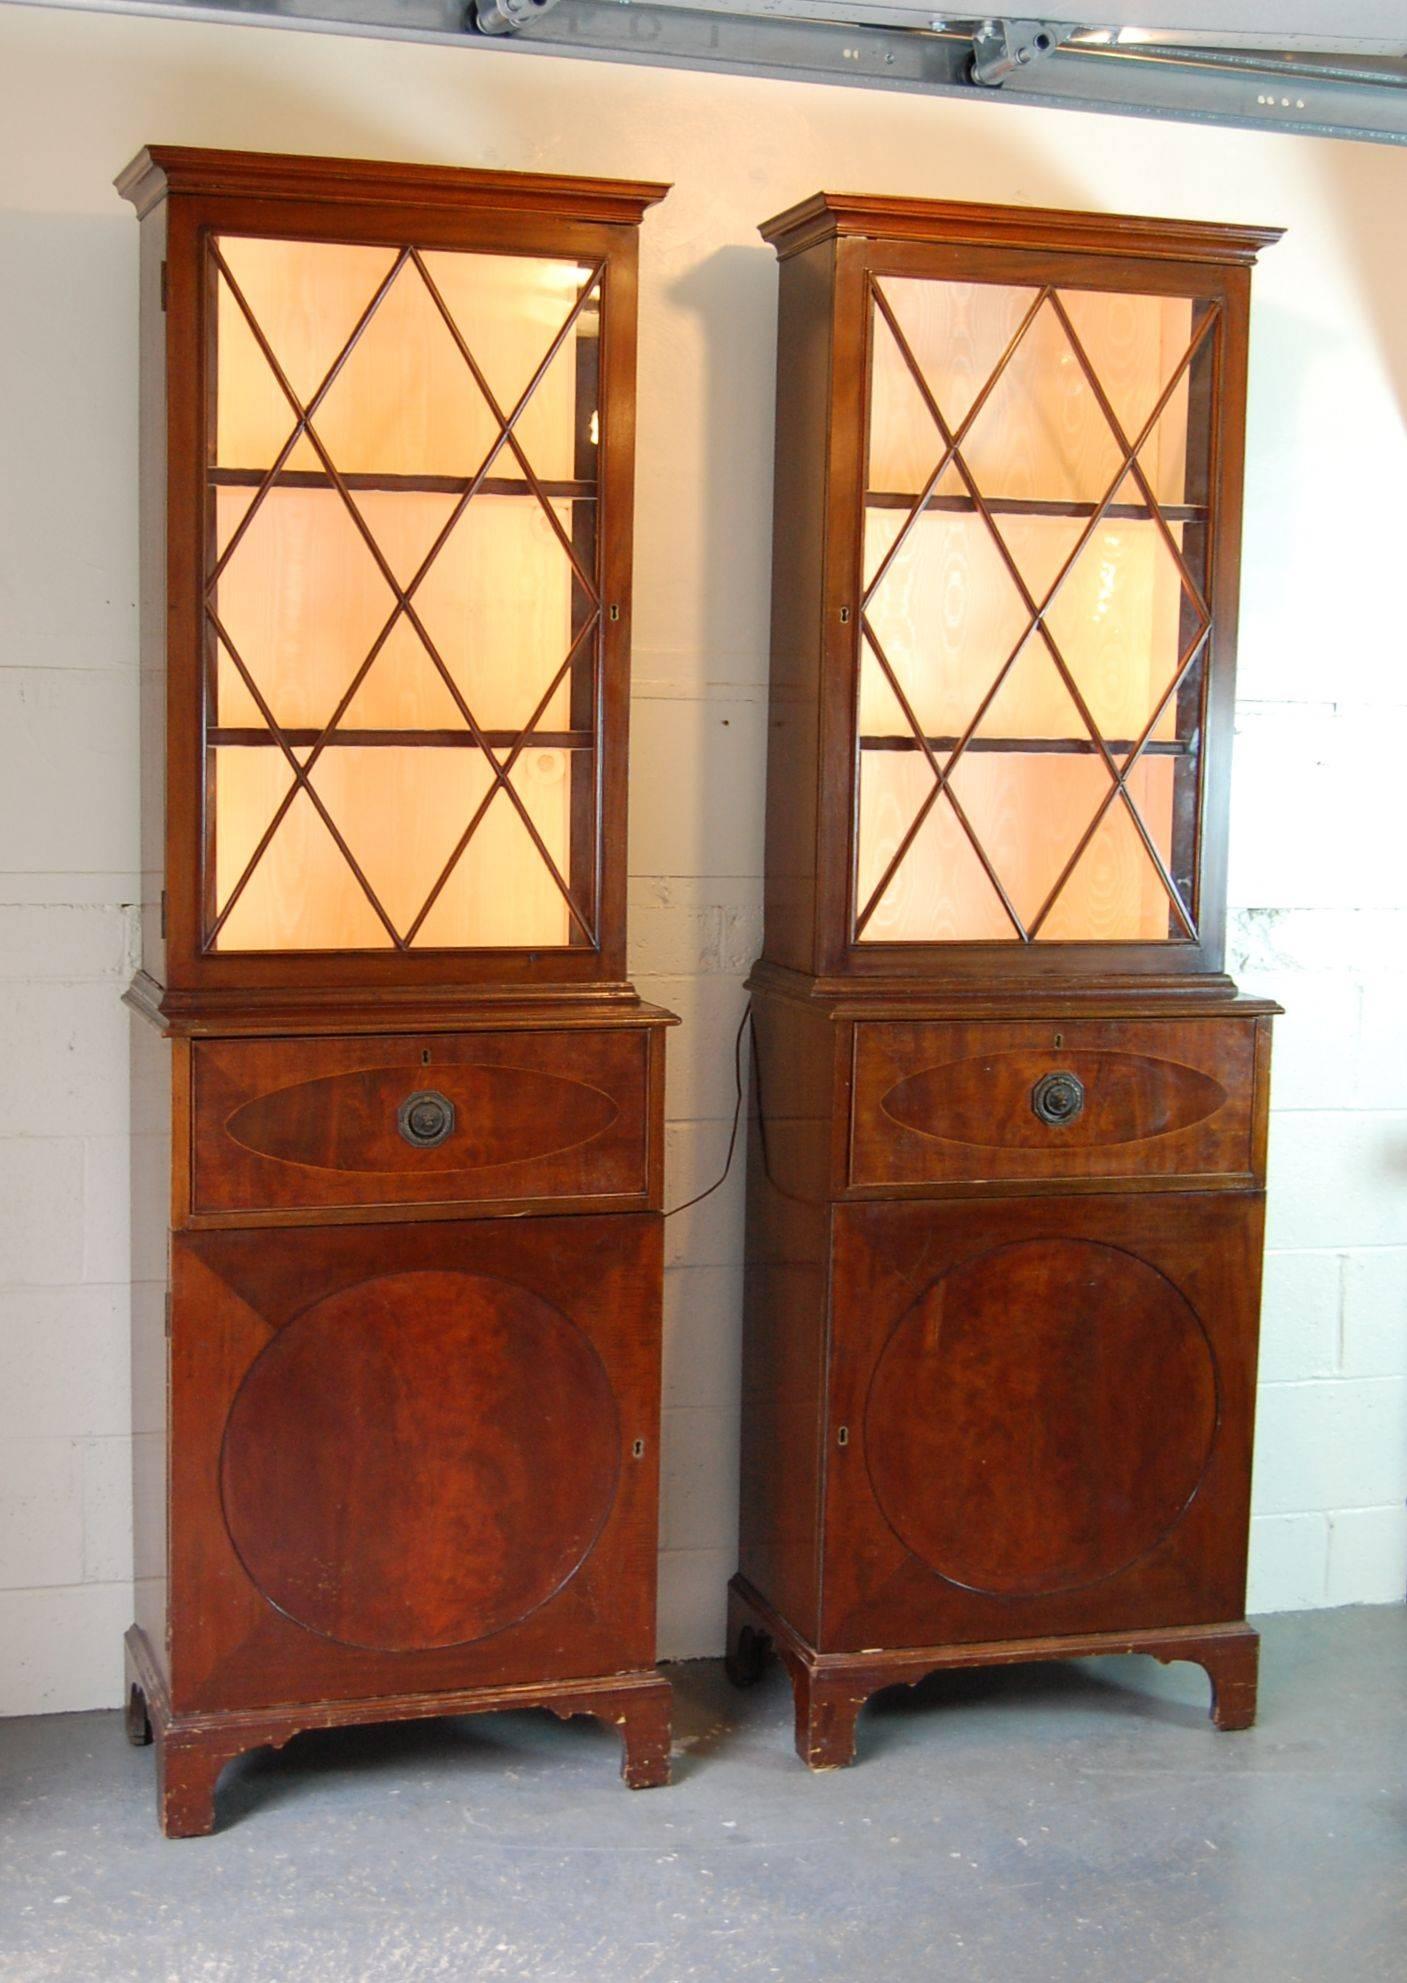 Pair of tall cabinets with lighted upper sections, cabinet bases and secretary drawer with drop down front.